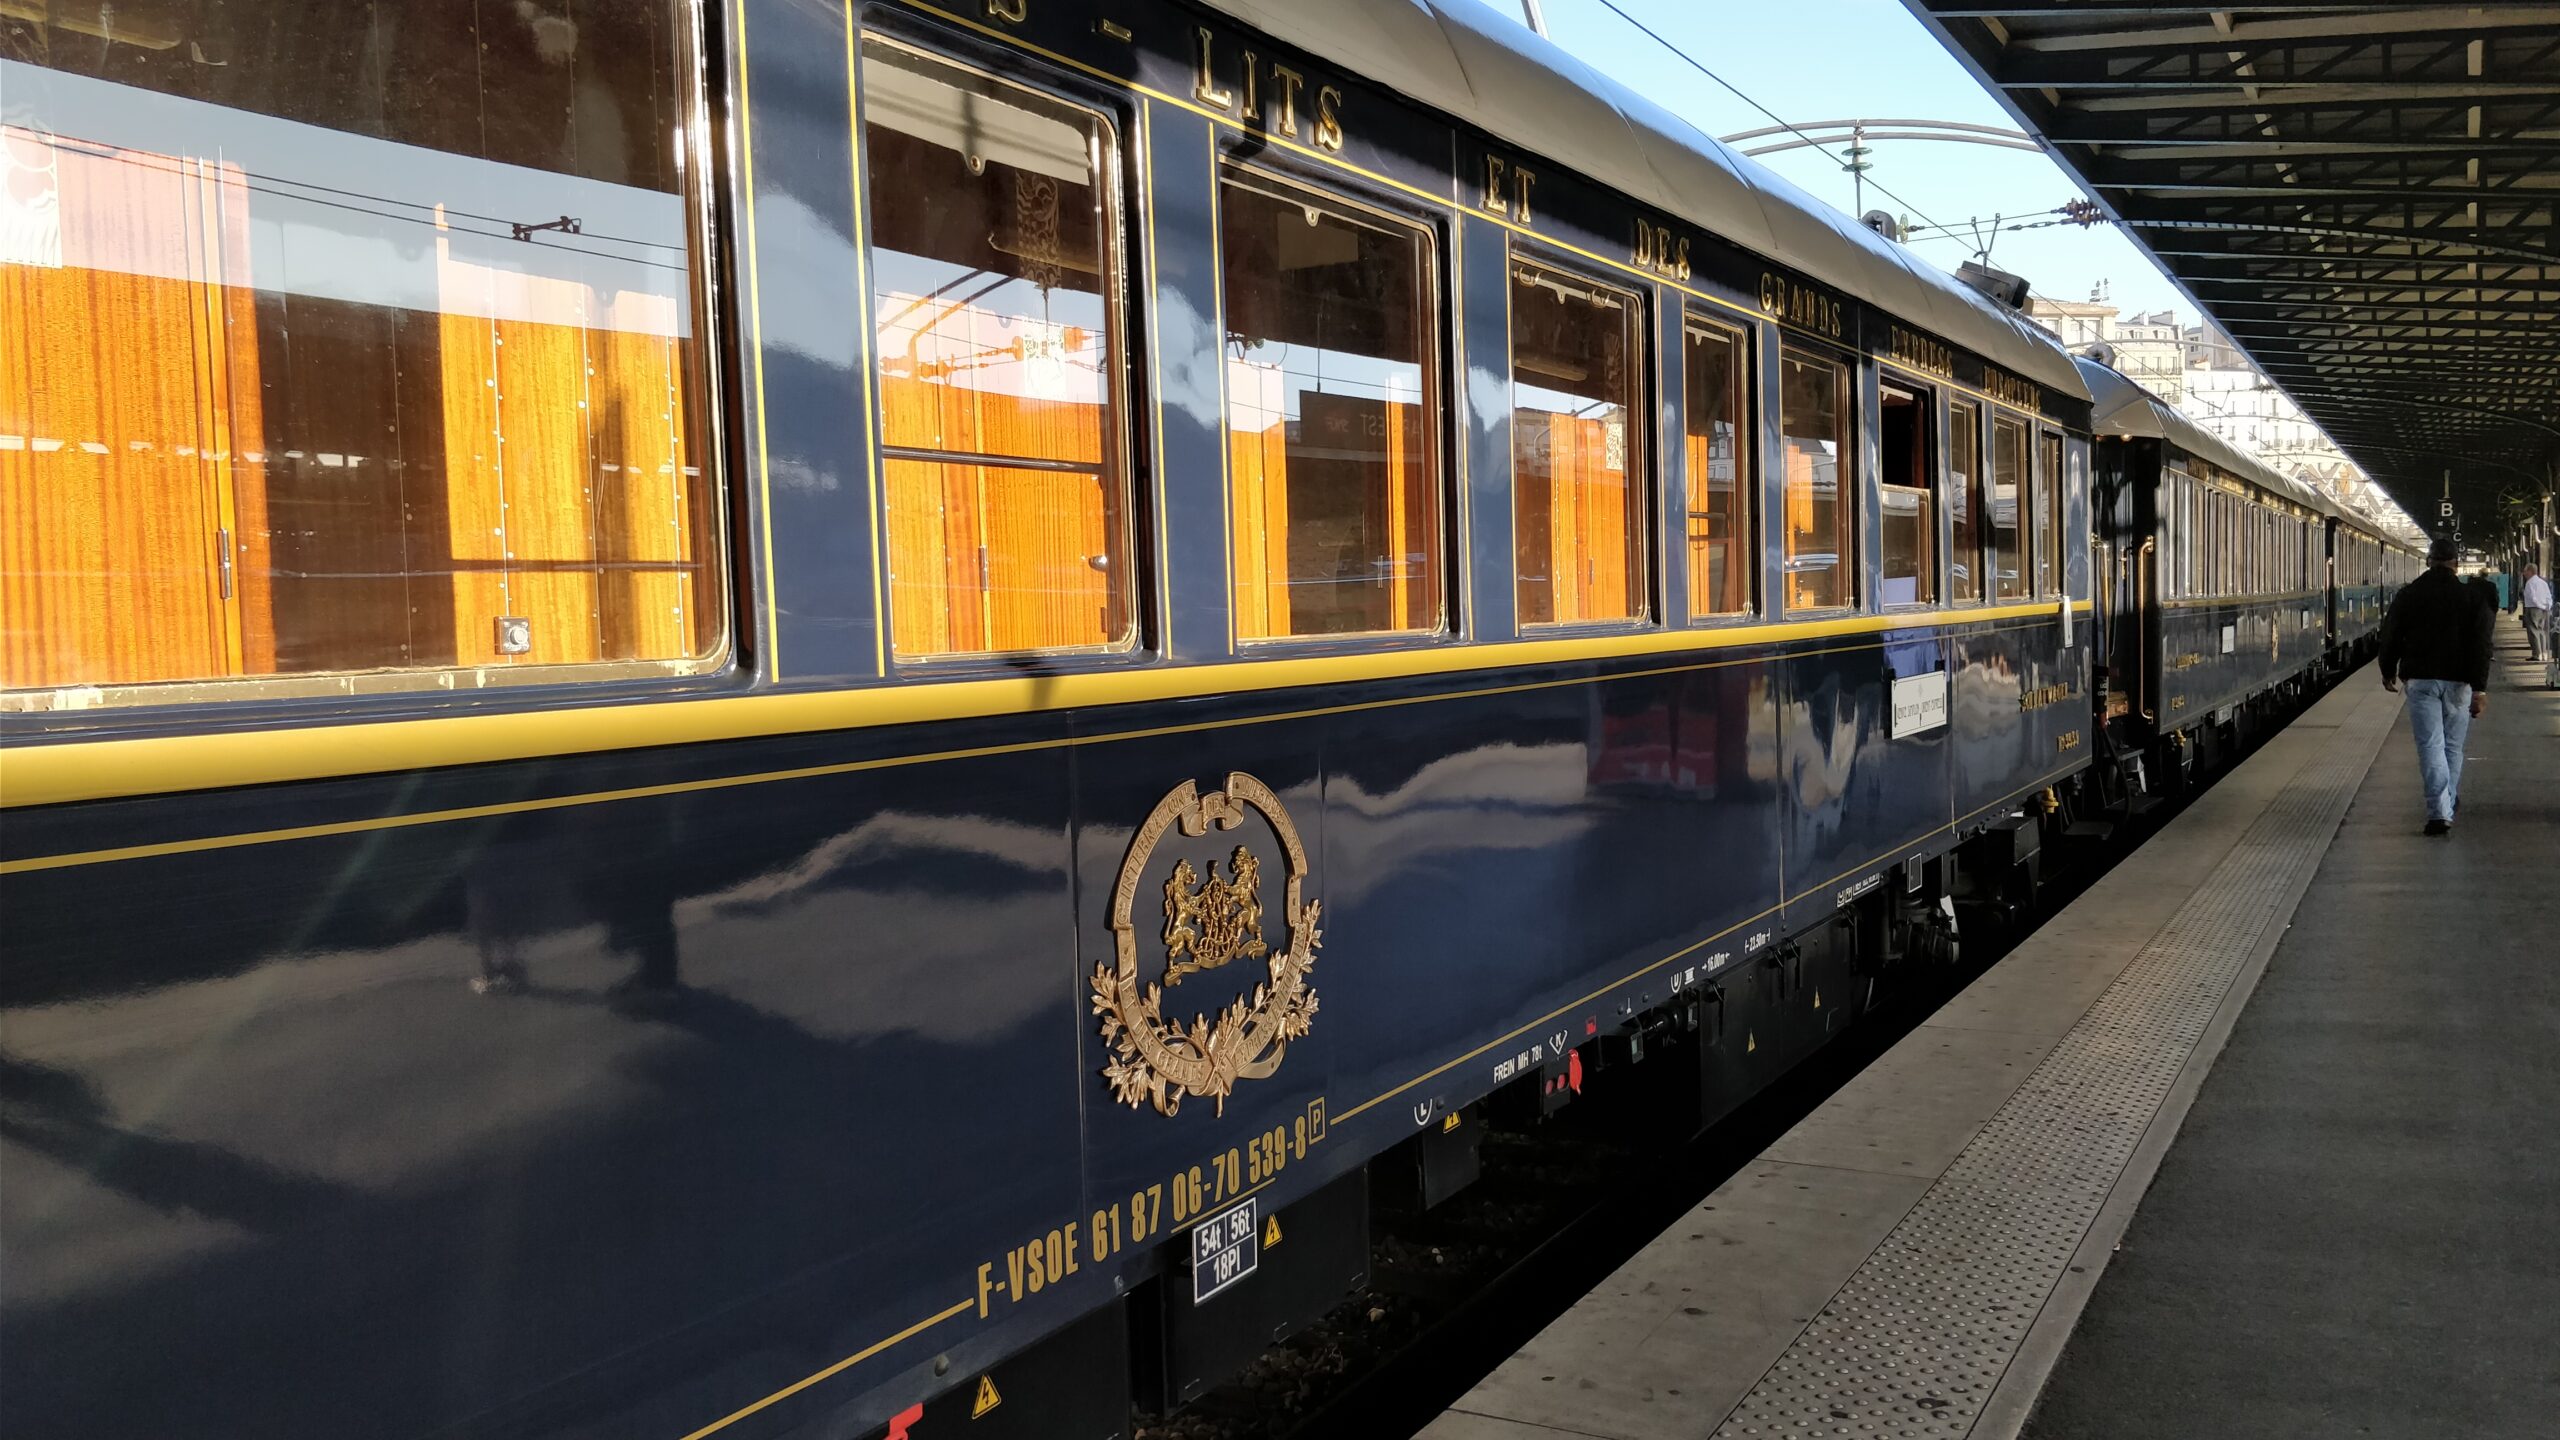 Luxurious 2-Day Orient Express Journey: London to Venice